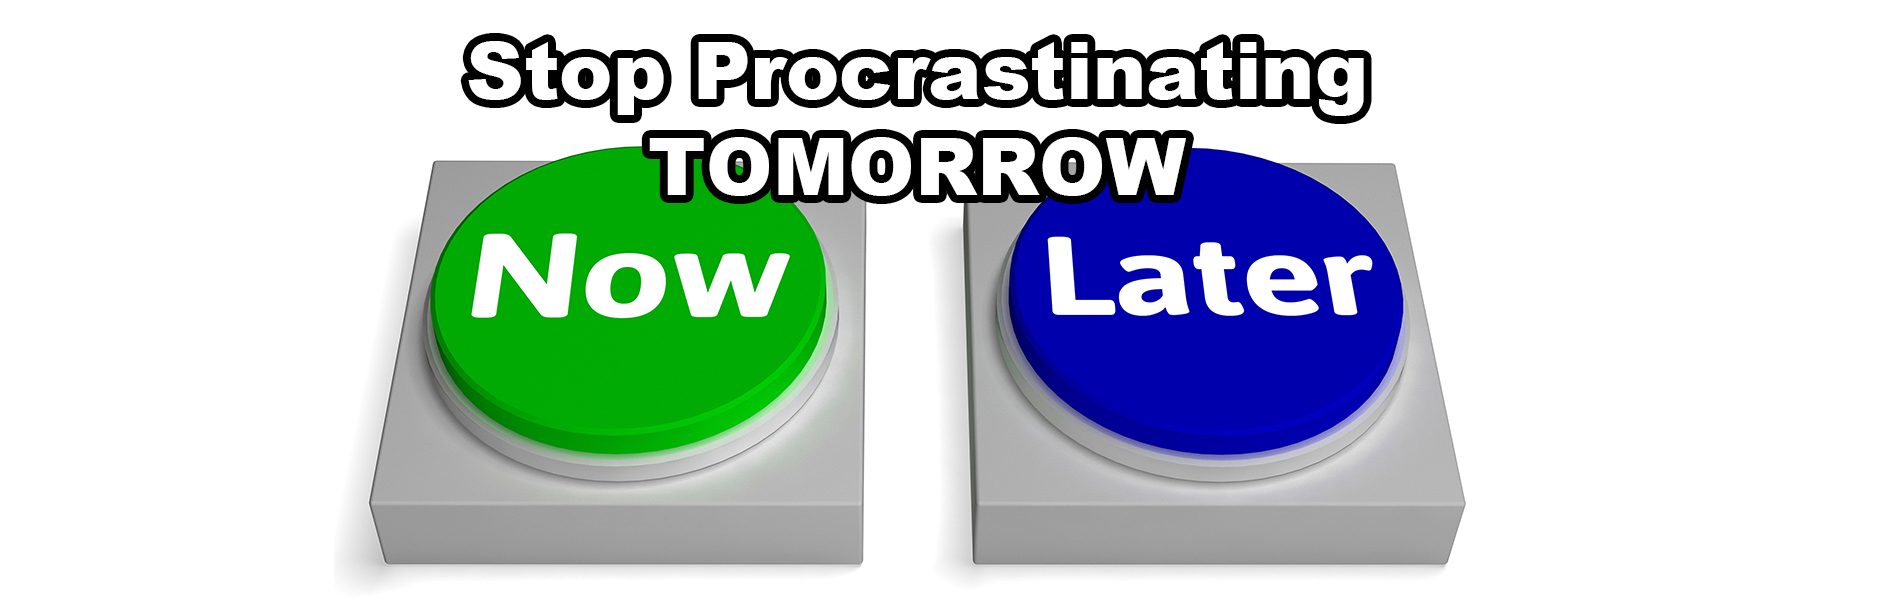 Stop Procrastination Tomorrow - Two buttons in graphic labelled Now and Later